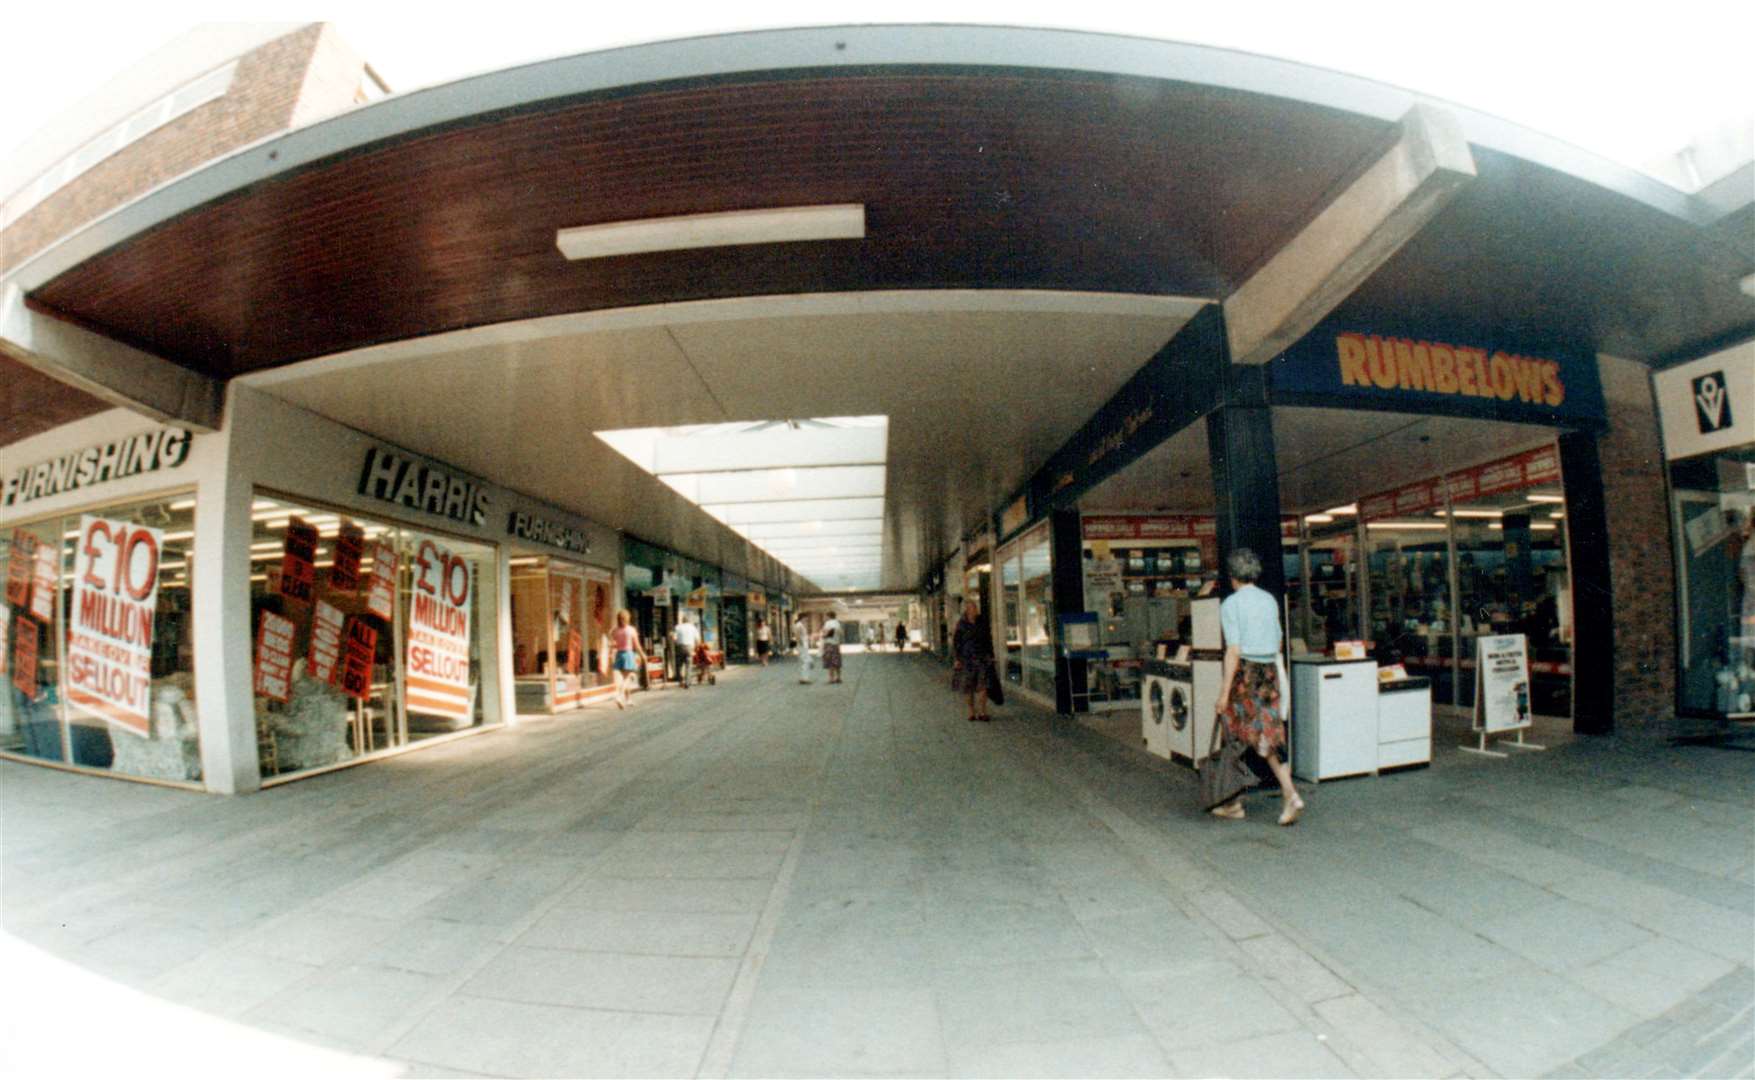 Long-lost chains Harris Furnishing and Rumbelows are seen here in the south mall of the Tufton Centre in 1987. Picture: Steve Salter